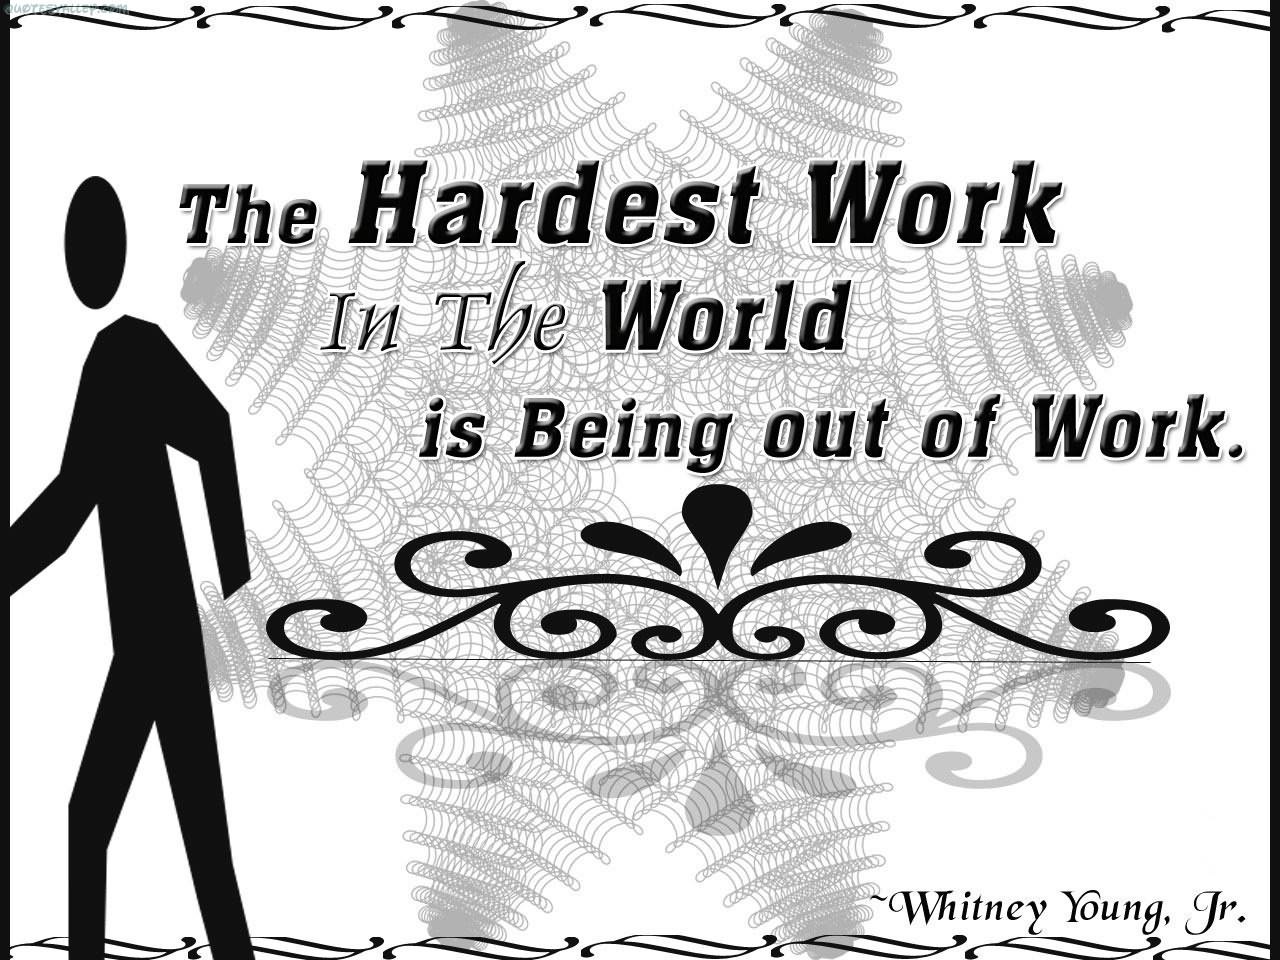 The hardest work in the world is being out of work - Whitney M. Young